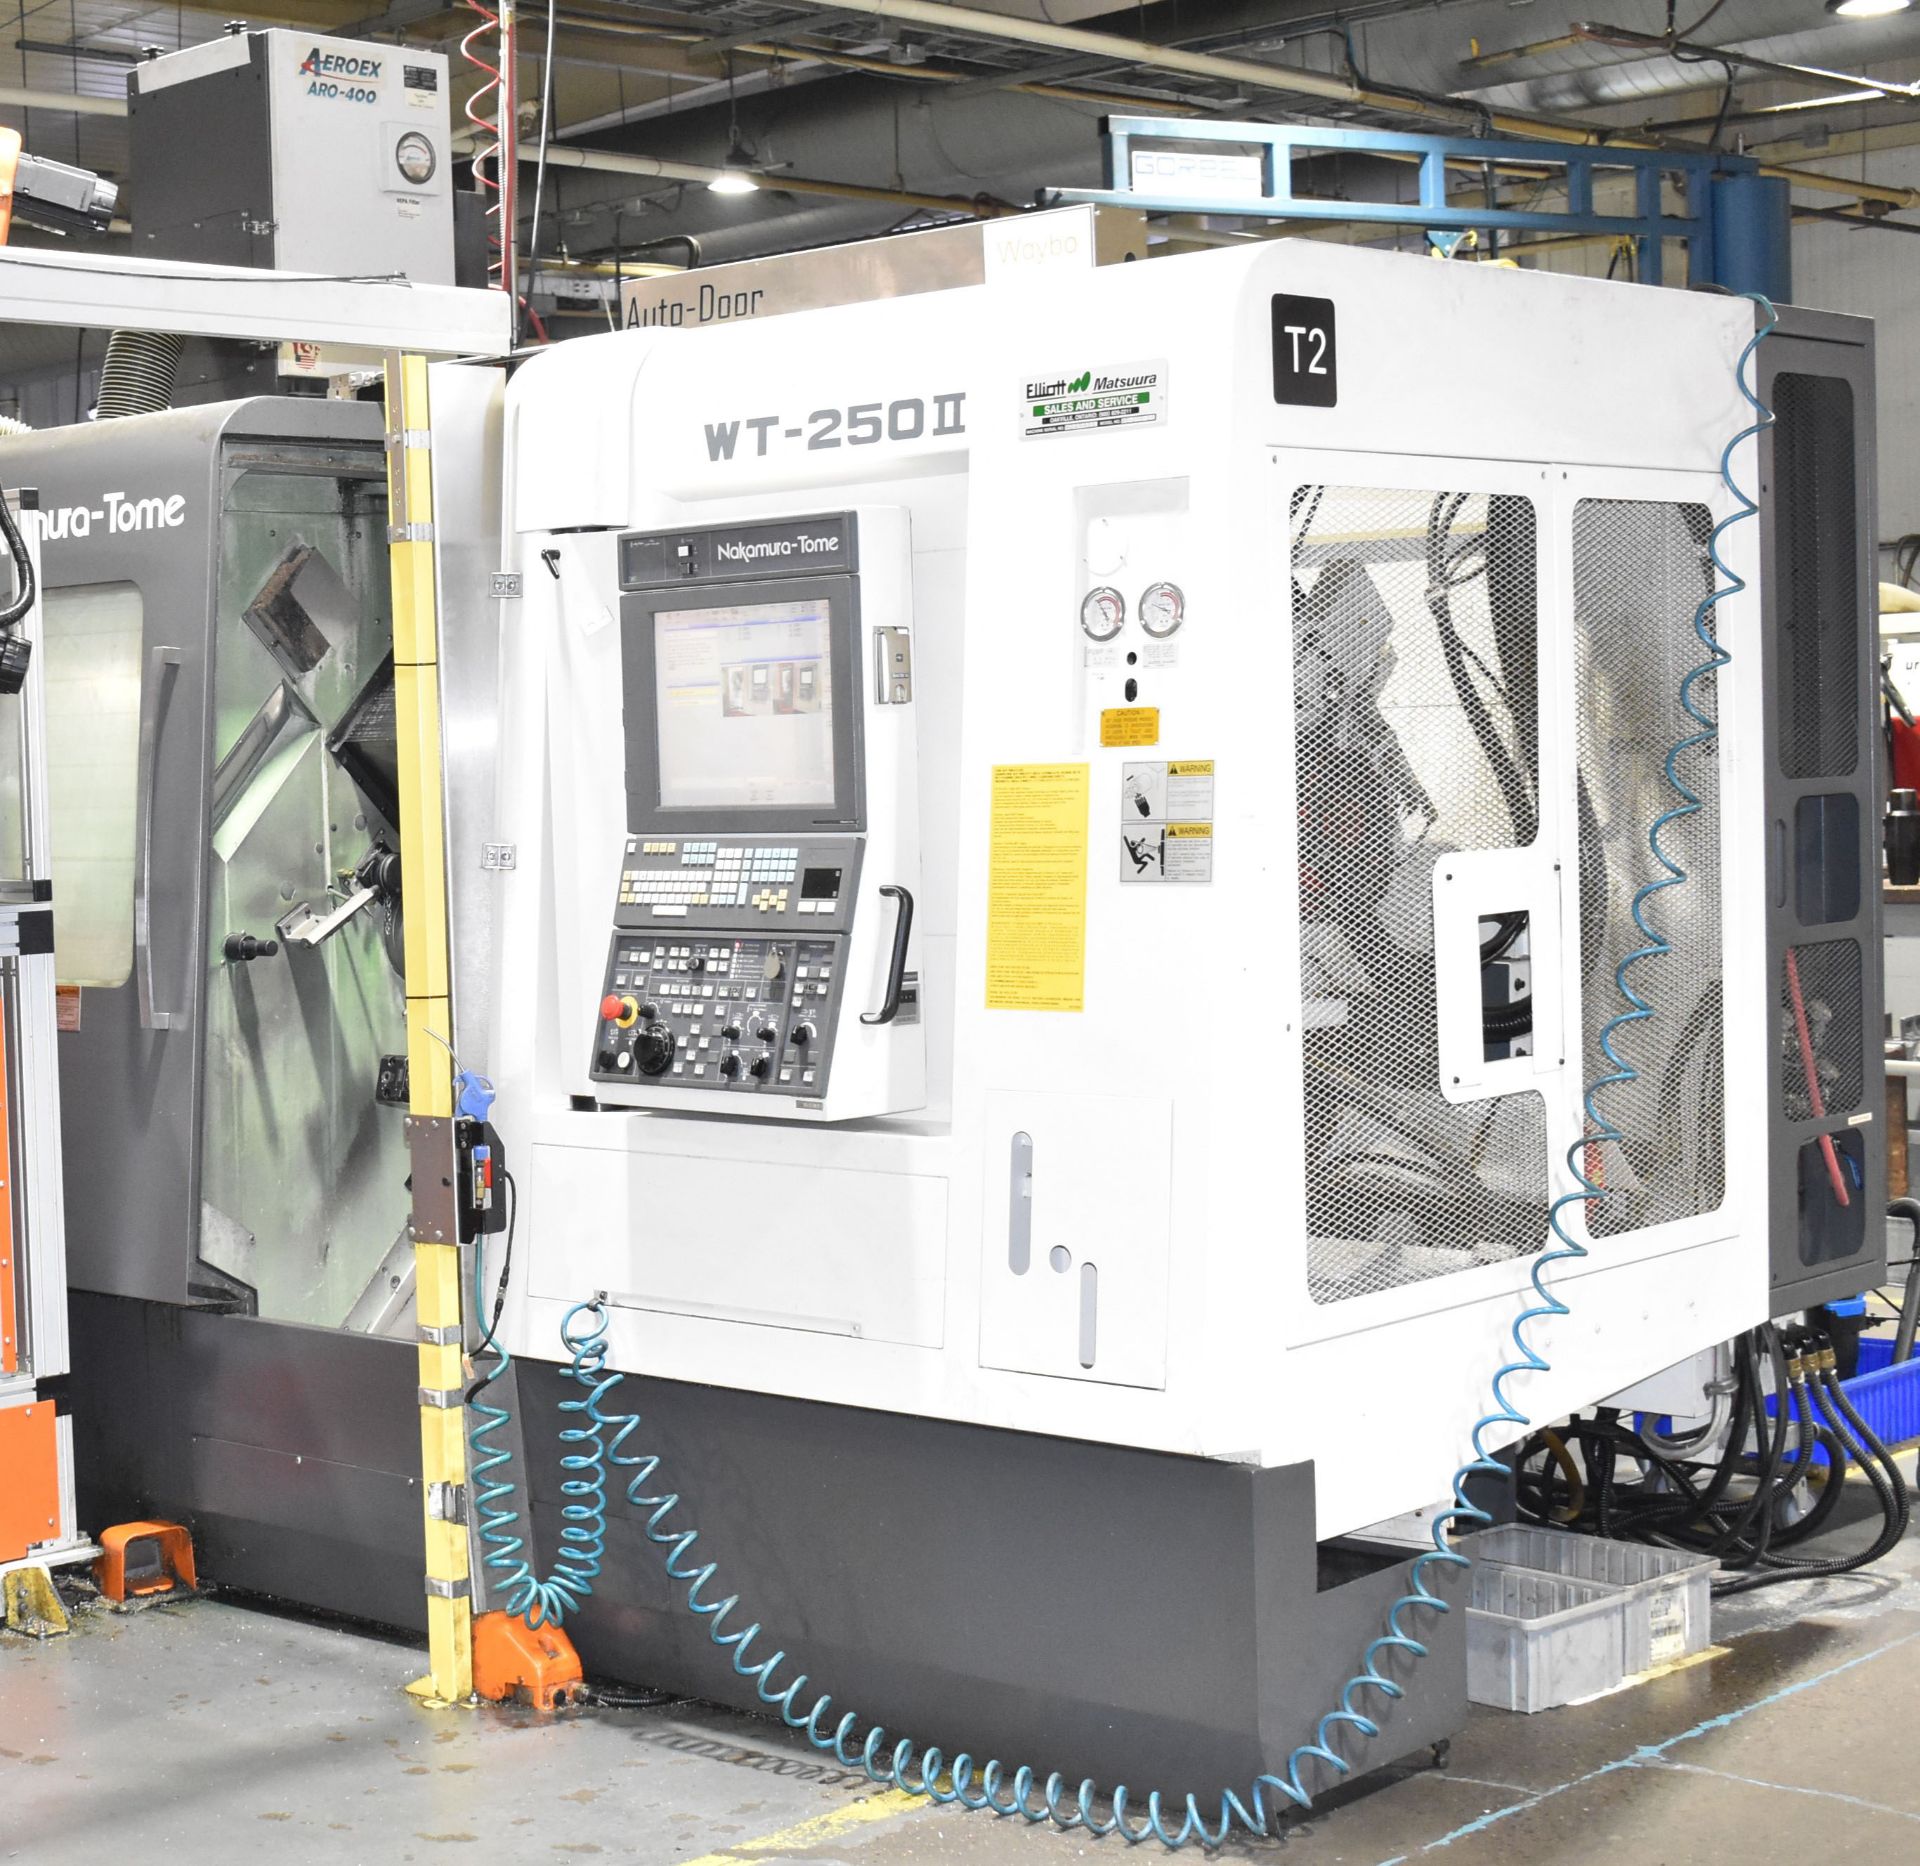 NAKAMURA-TOME (2013) WT-250 II S MULTI-AXIS OPPOSED SPINDLE AND TWIN TURRET CNC MULTI-TASKING CENTER